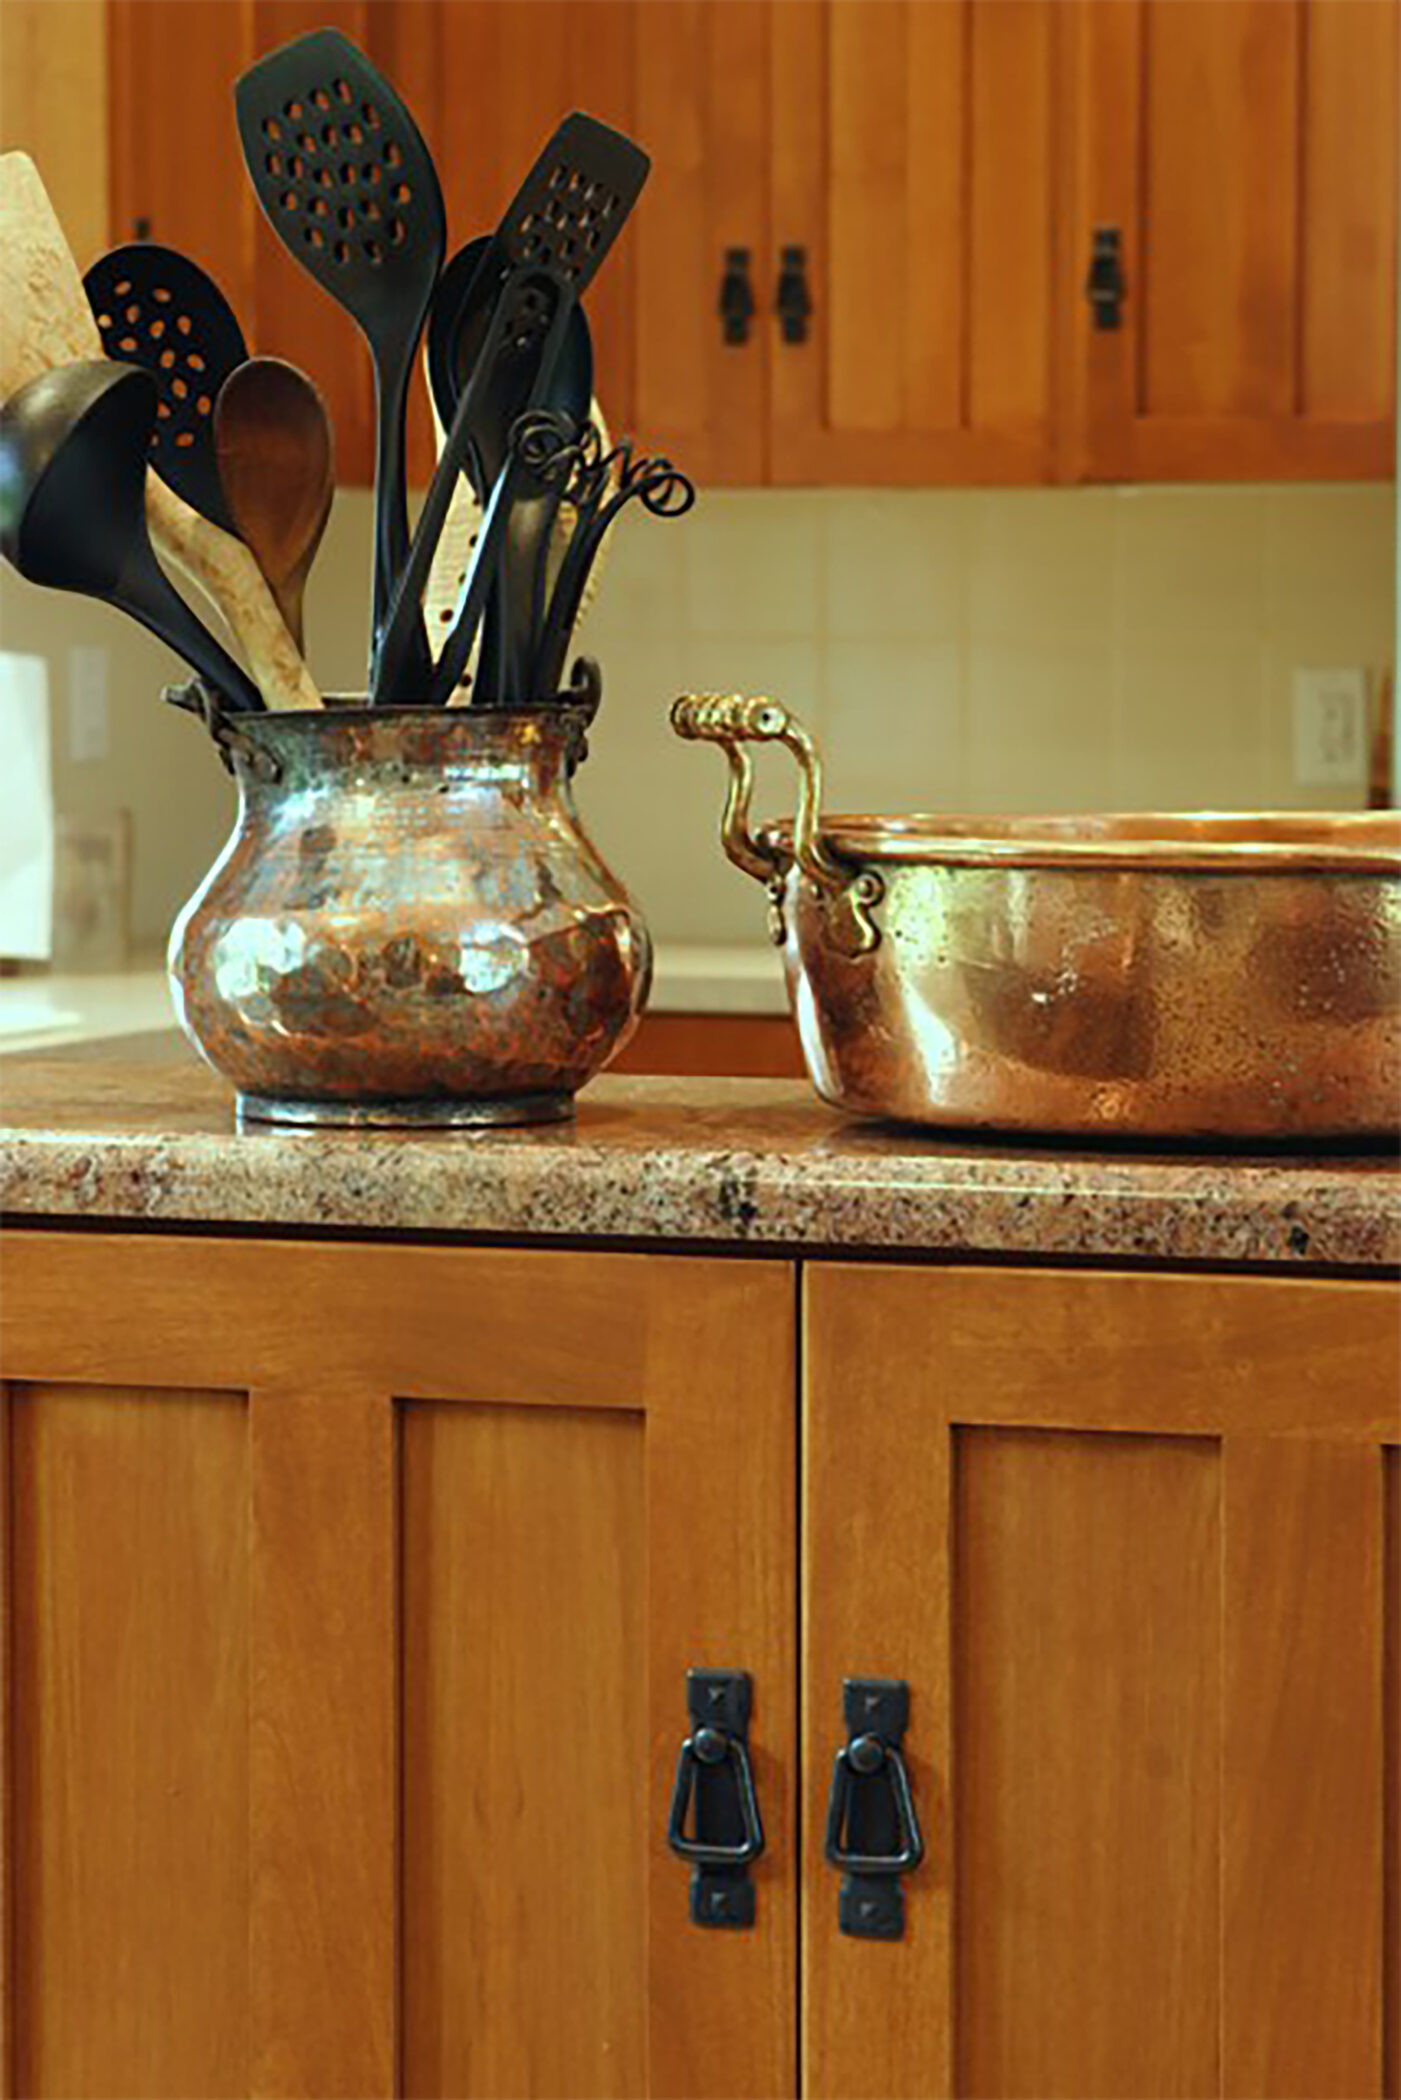 Granite countertops with shaker style cabinets.